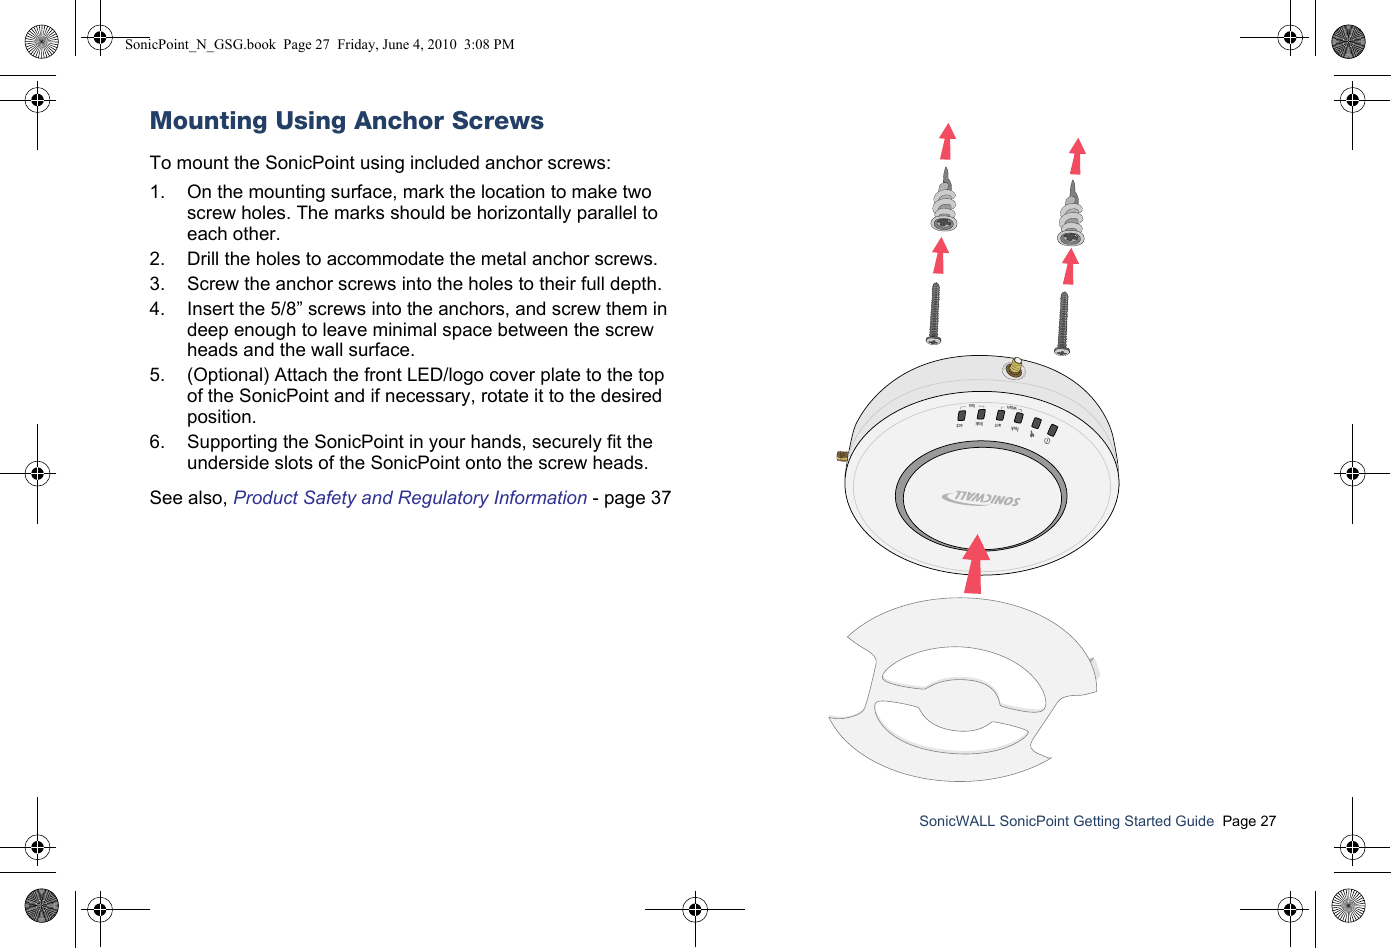 SonicWALL SonicPoint Getting Started Guide  Page 27Mounting Using Anchor ScrewsTo mount the SonicPoint using included anchor screws:   1. On the mounting surface, mark the location to make two screw holes. The marks should be horizontally parallel to each other.2. Drill the holes to accommodate the metal anchor screws.3. Screw the anchor screws into the holes to their full depth. 4. Insert the 5/8” screws into the anchors, and screw them in deep enough to leave minimal space between the screw heads and the wall surface.5. (Optional) Attach the front LED/logo cover plate to the top of the SonicPoint and if necessary, rotate it to the desired position.6. Supporting the SonicPoint in your hands, securely fit the underside slots of the SonicPoint onto the screw heads.See also, Product Safety and Regulatory Information - page 37linkwlanlanactlinkactSonicPoint_N_GSG.book  Page 27  Friday, June 4, 2010  3:08 PM